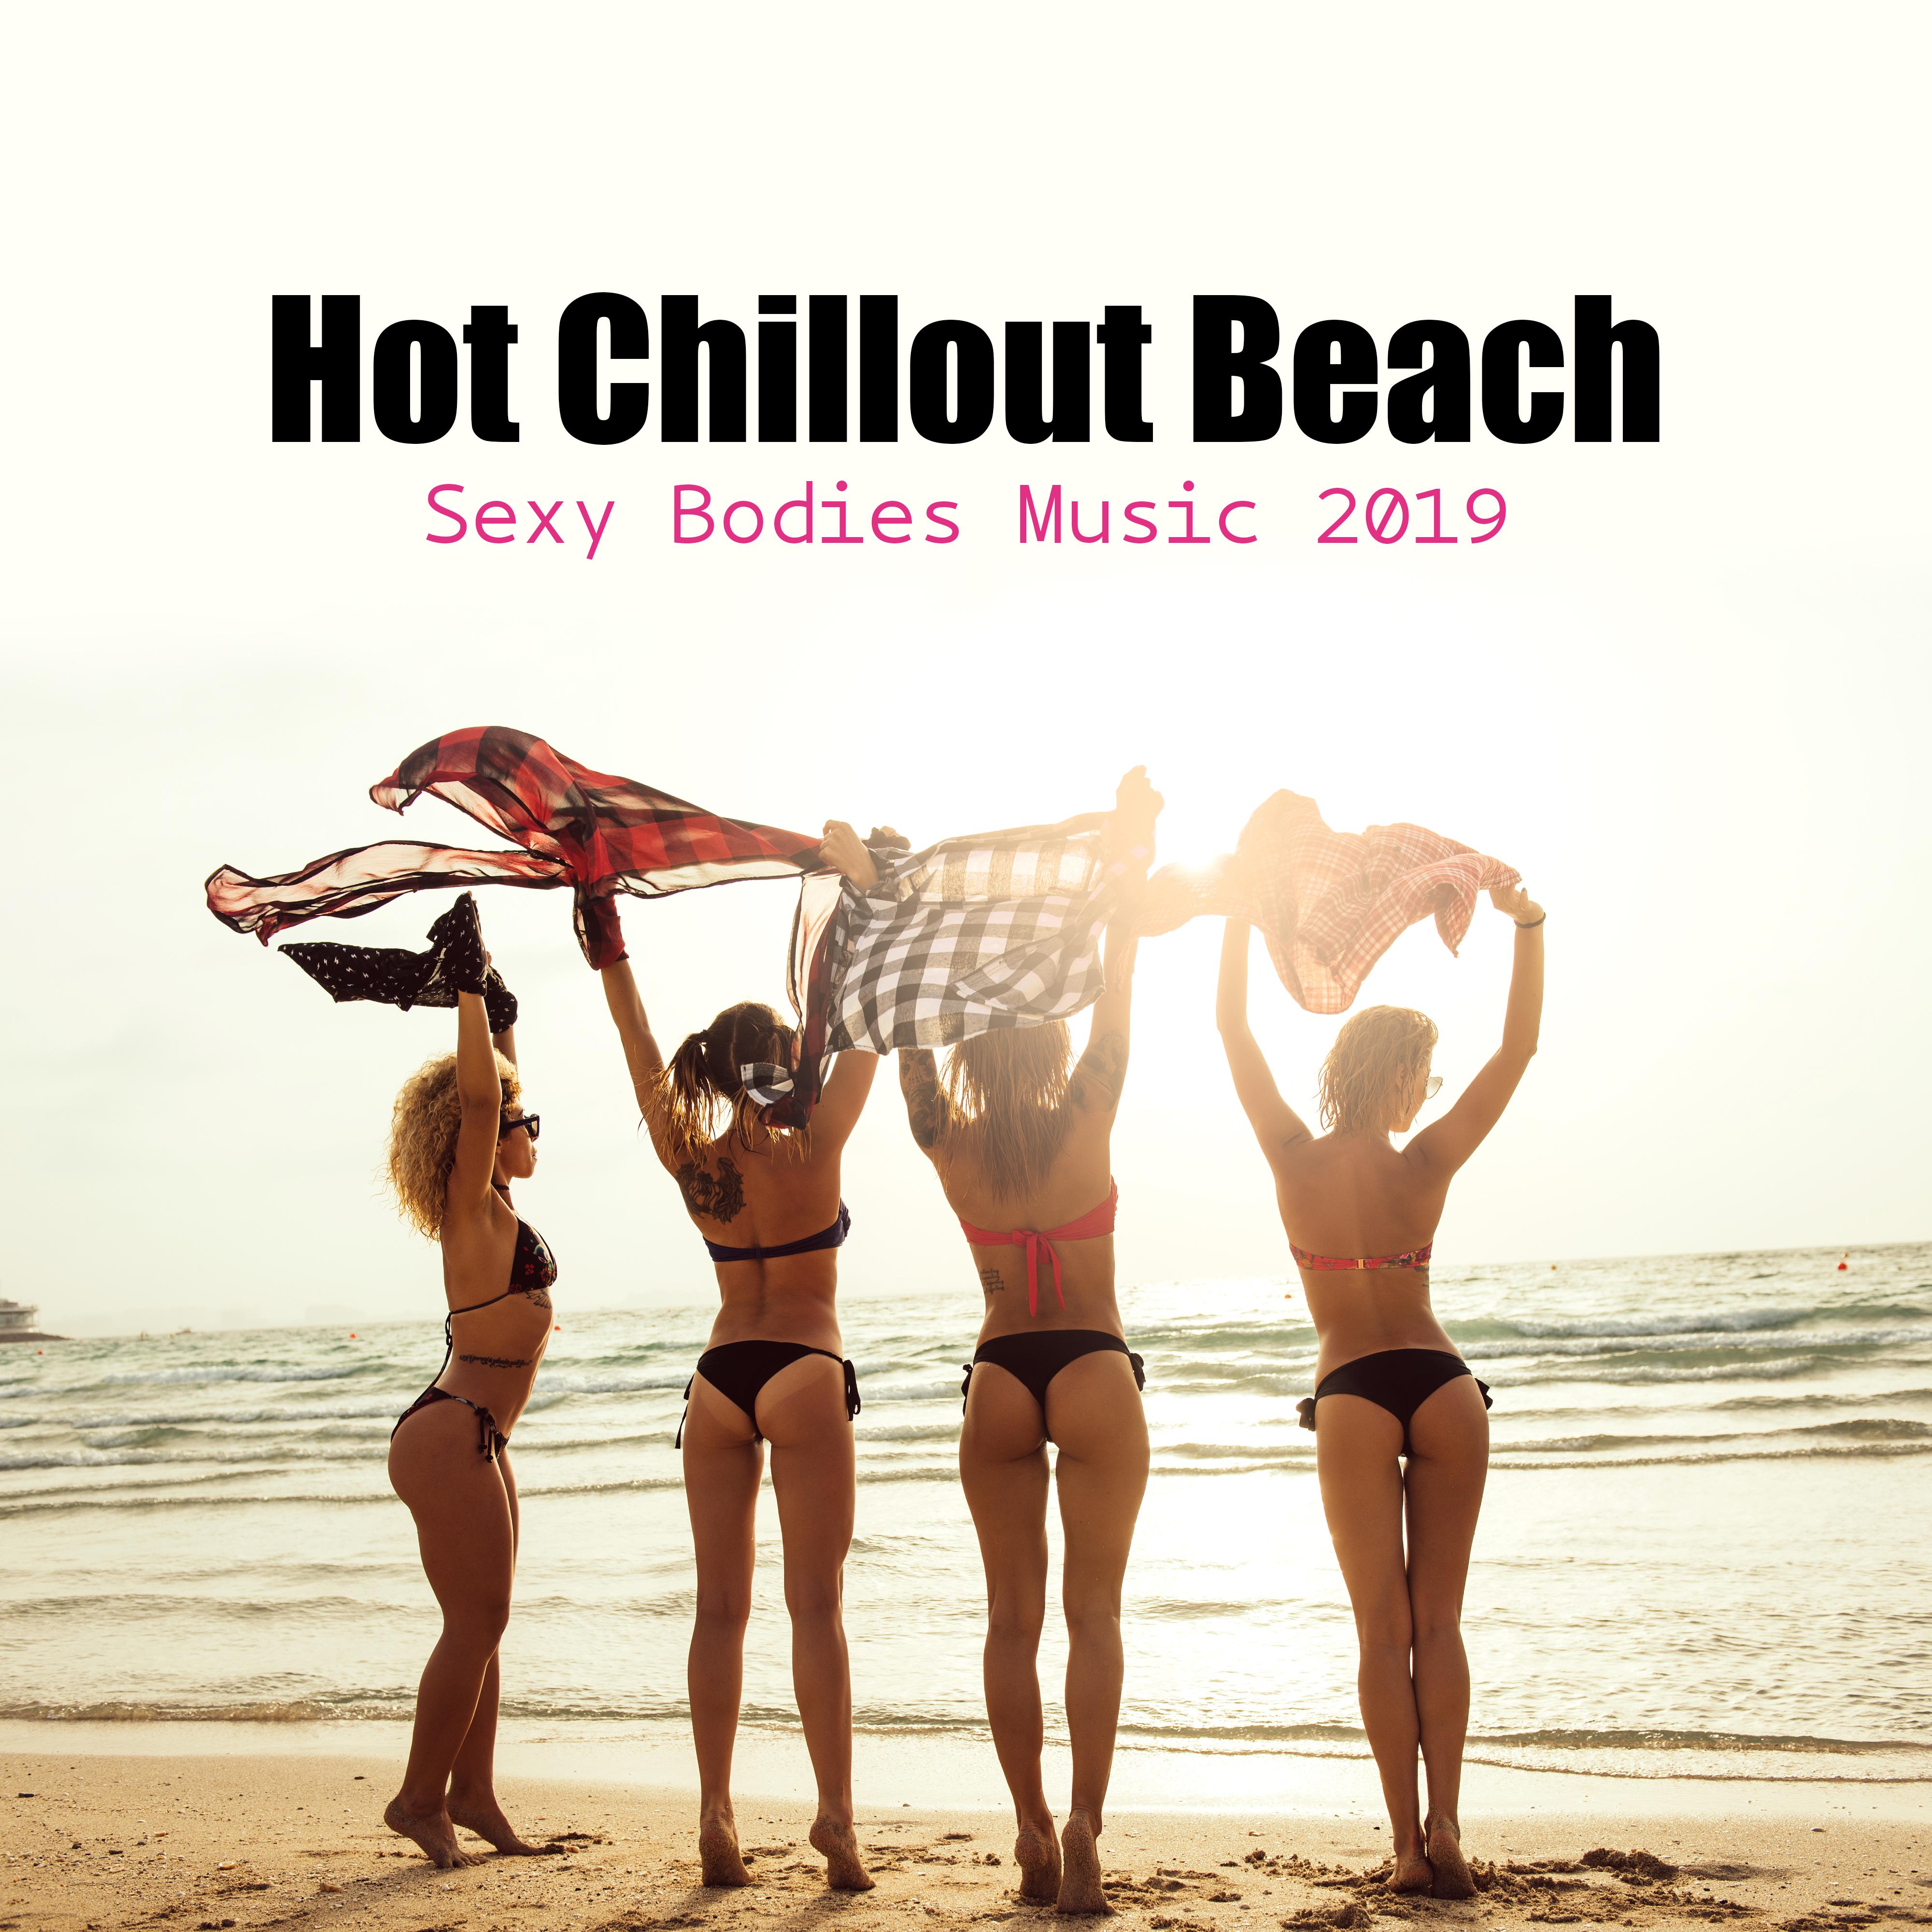 Hot Chillout Beach Sexy Bodies Music 2019